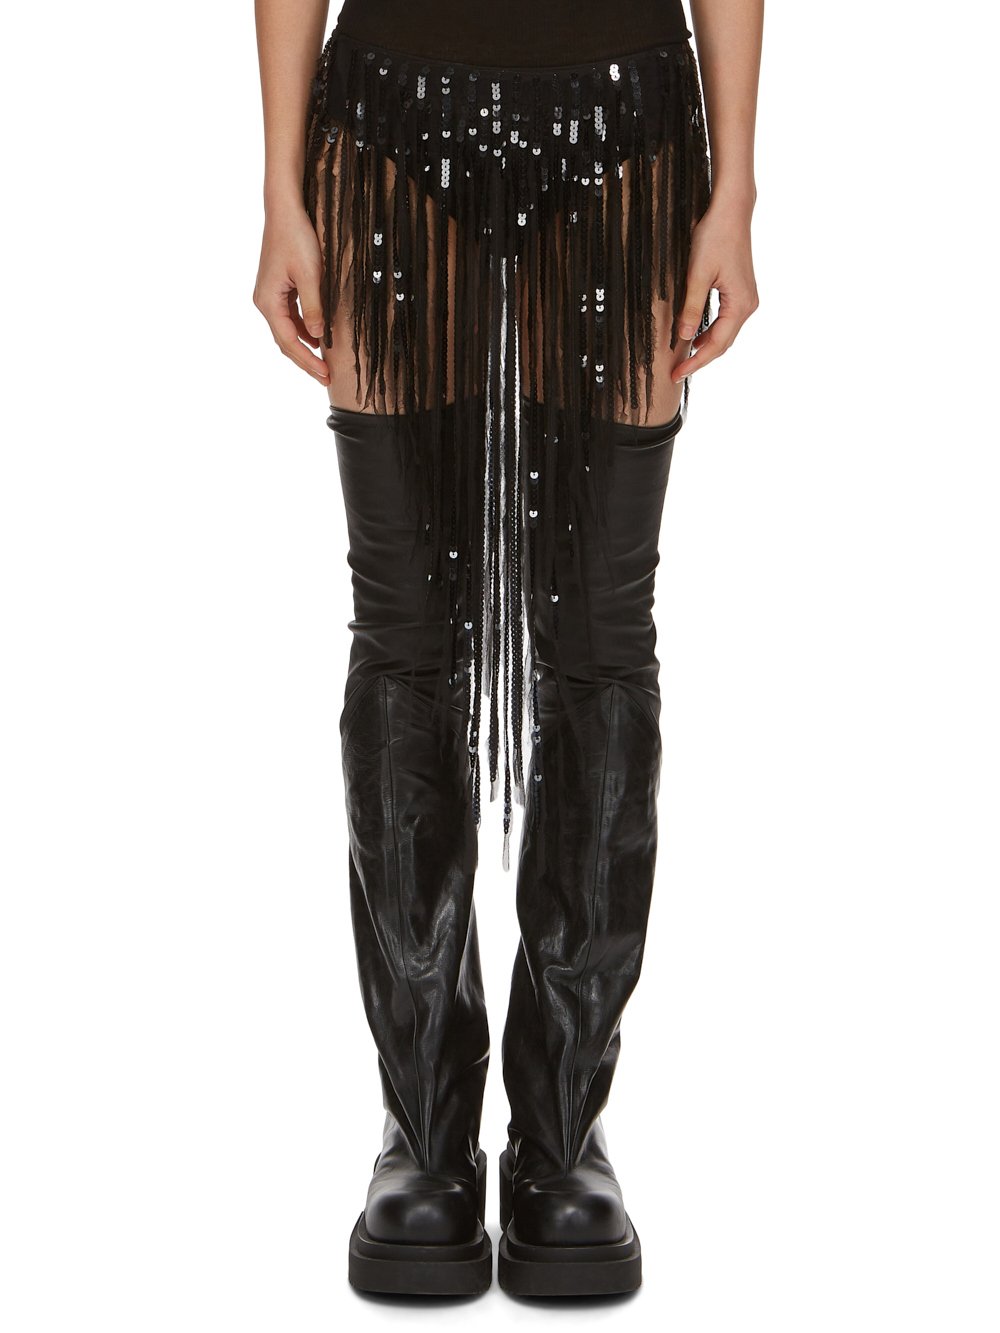 RICK OWENS FW23 LUXOR FRINGED PANTY IN BLACK SEQUIN EMBROIDERED SILK CHIFFON